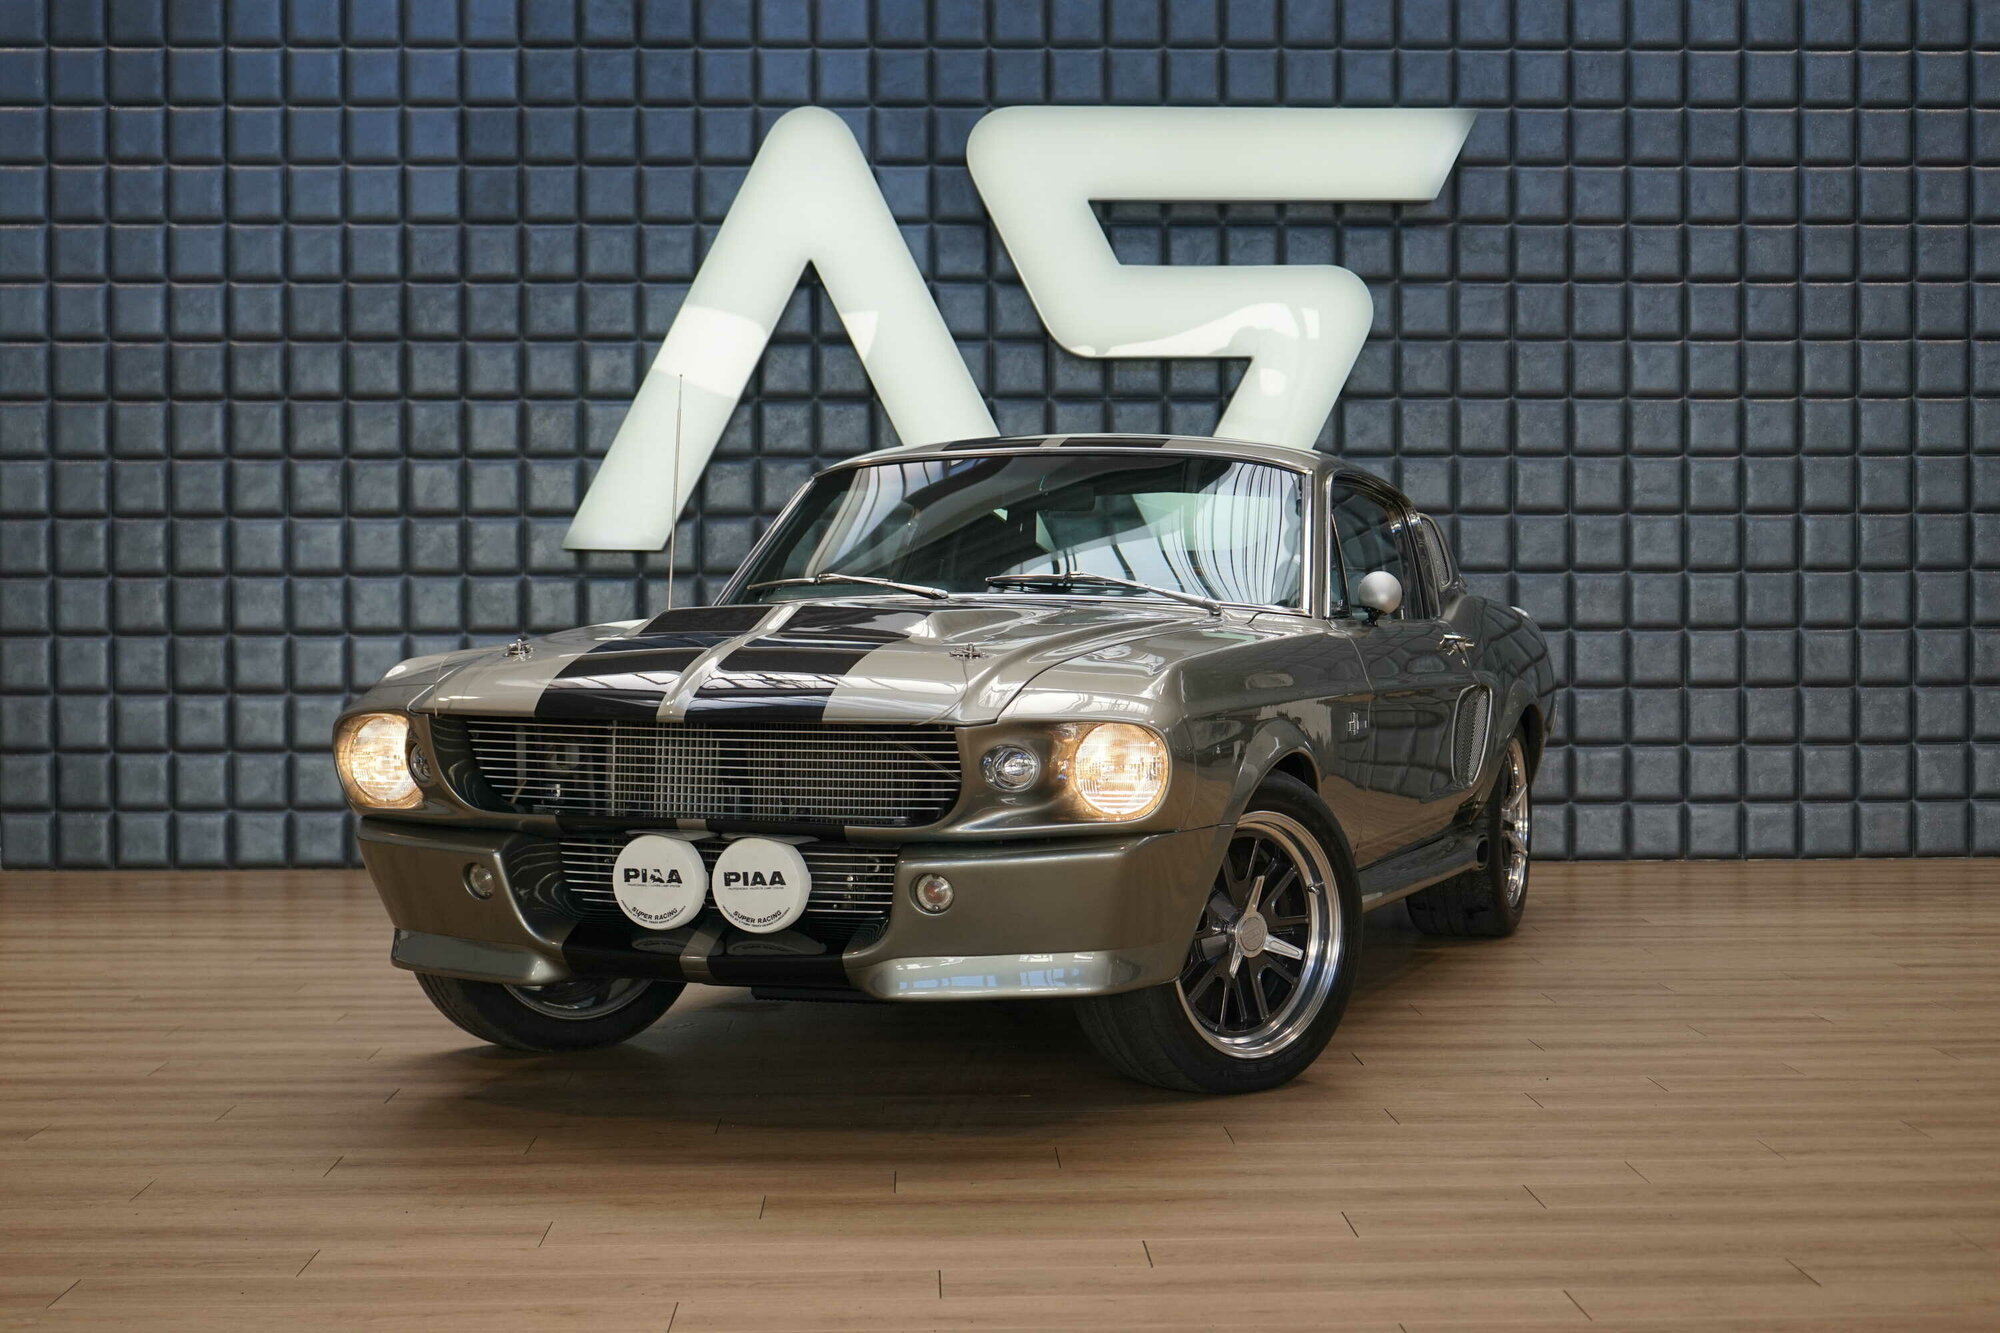 Ford Mustang Shelby GT 500 - Eleanor